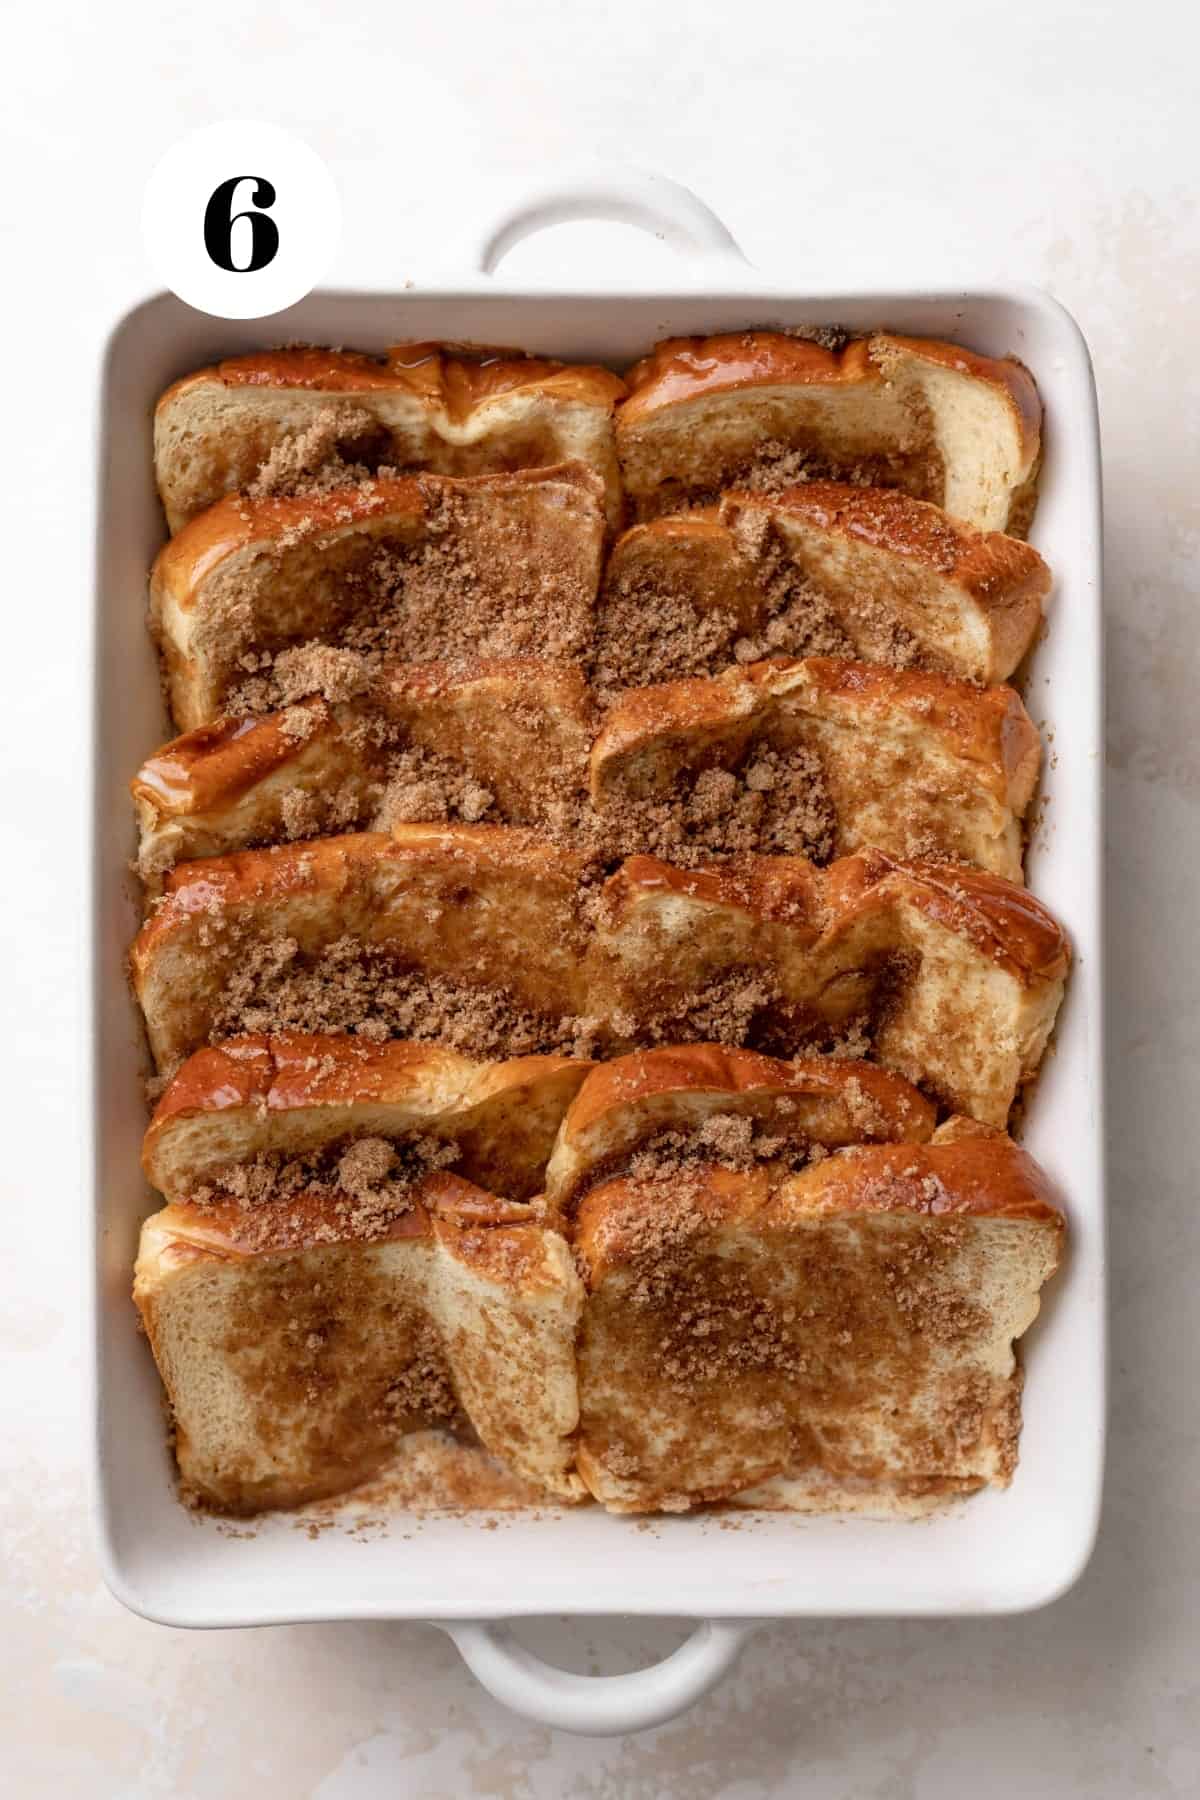 the brioche french toast before baking sprinkled with brown sugar.